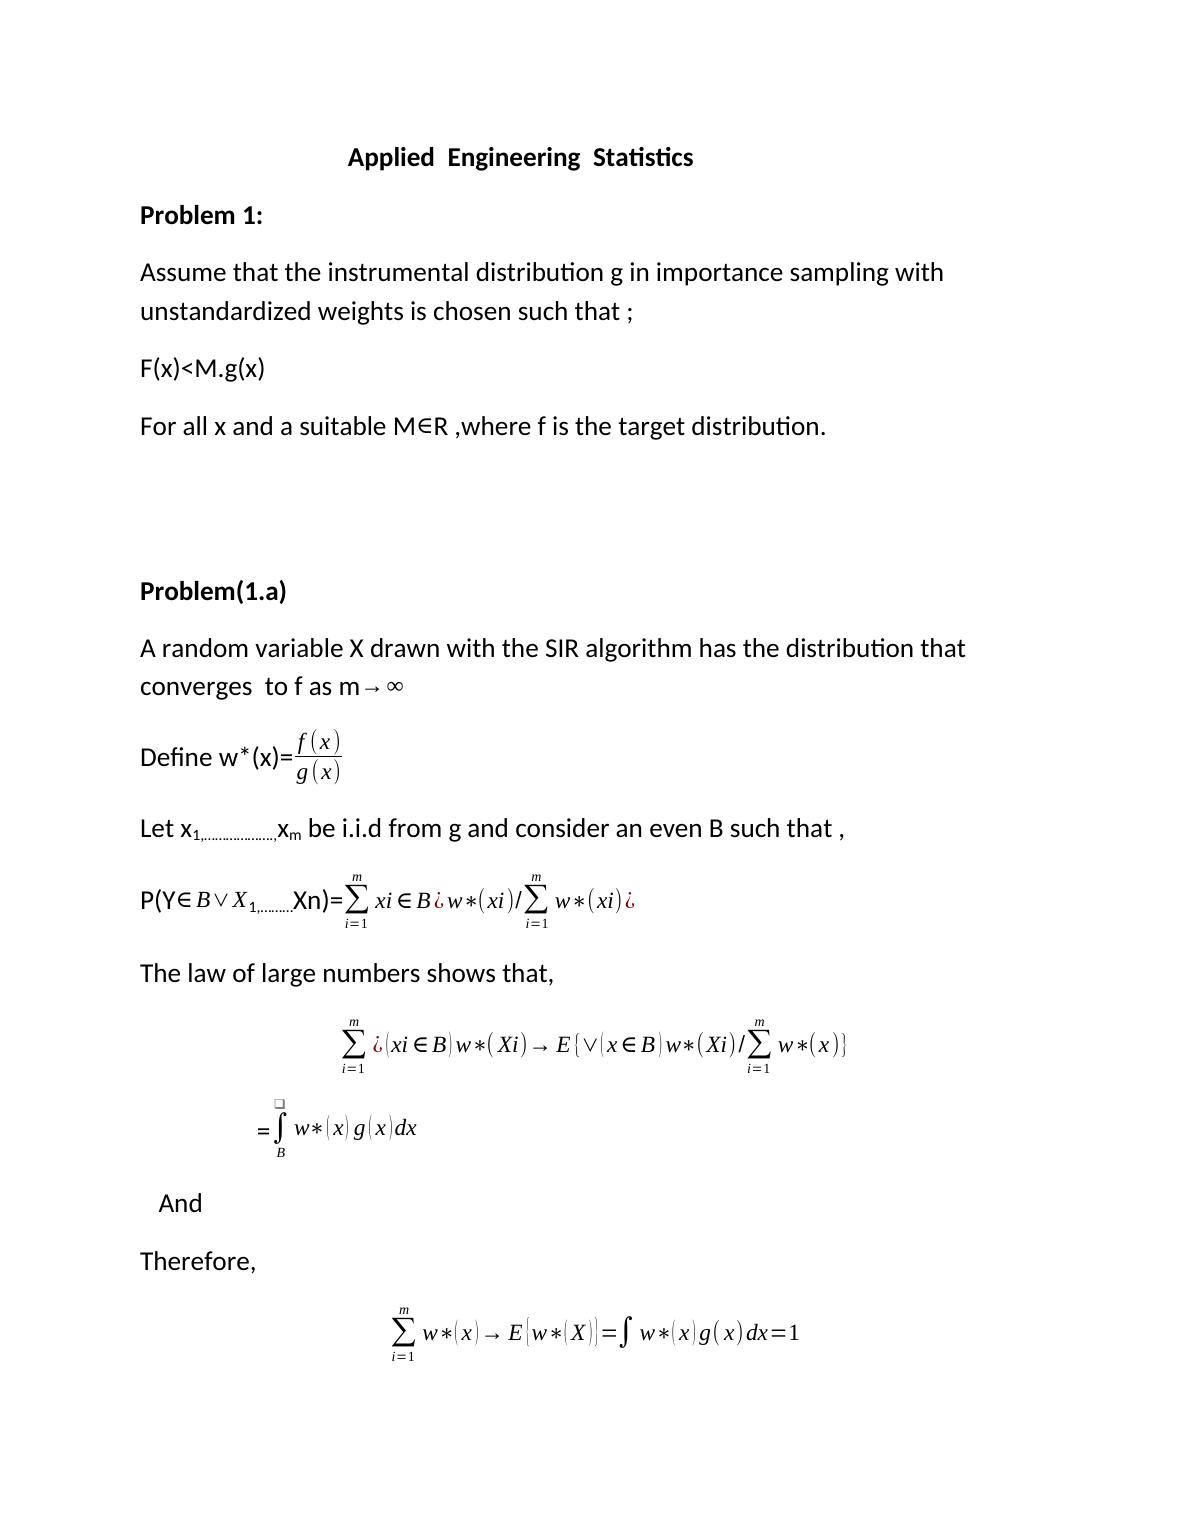 Applied Engineering Statistics | Questions-Answers_1